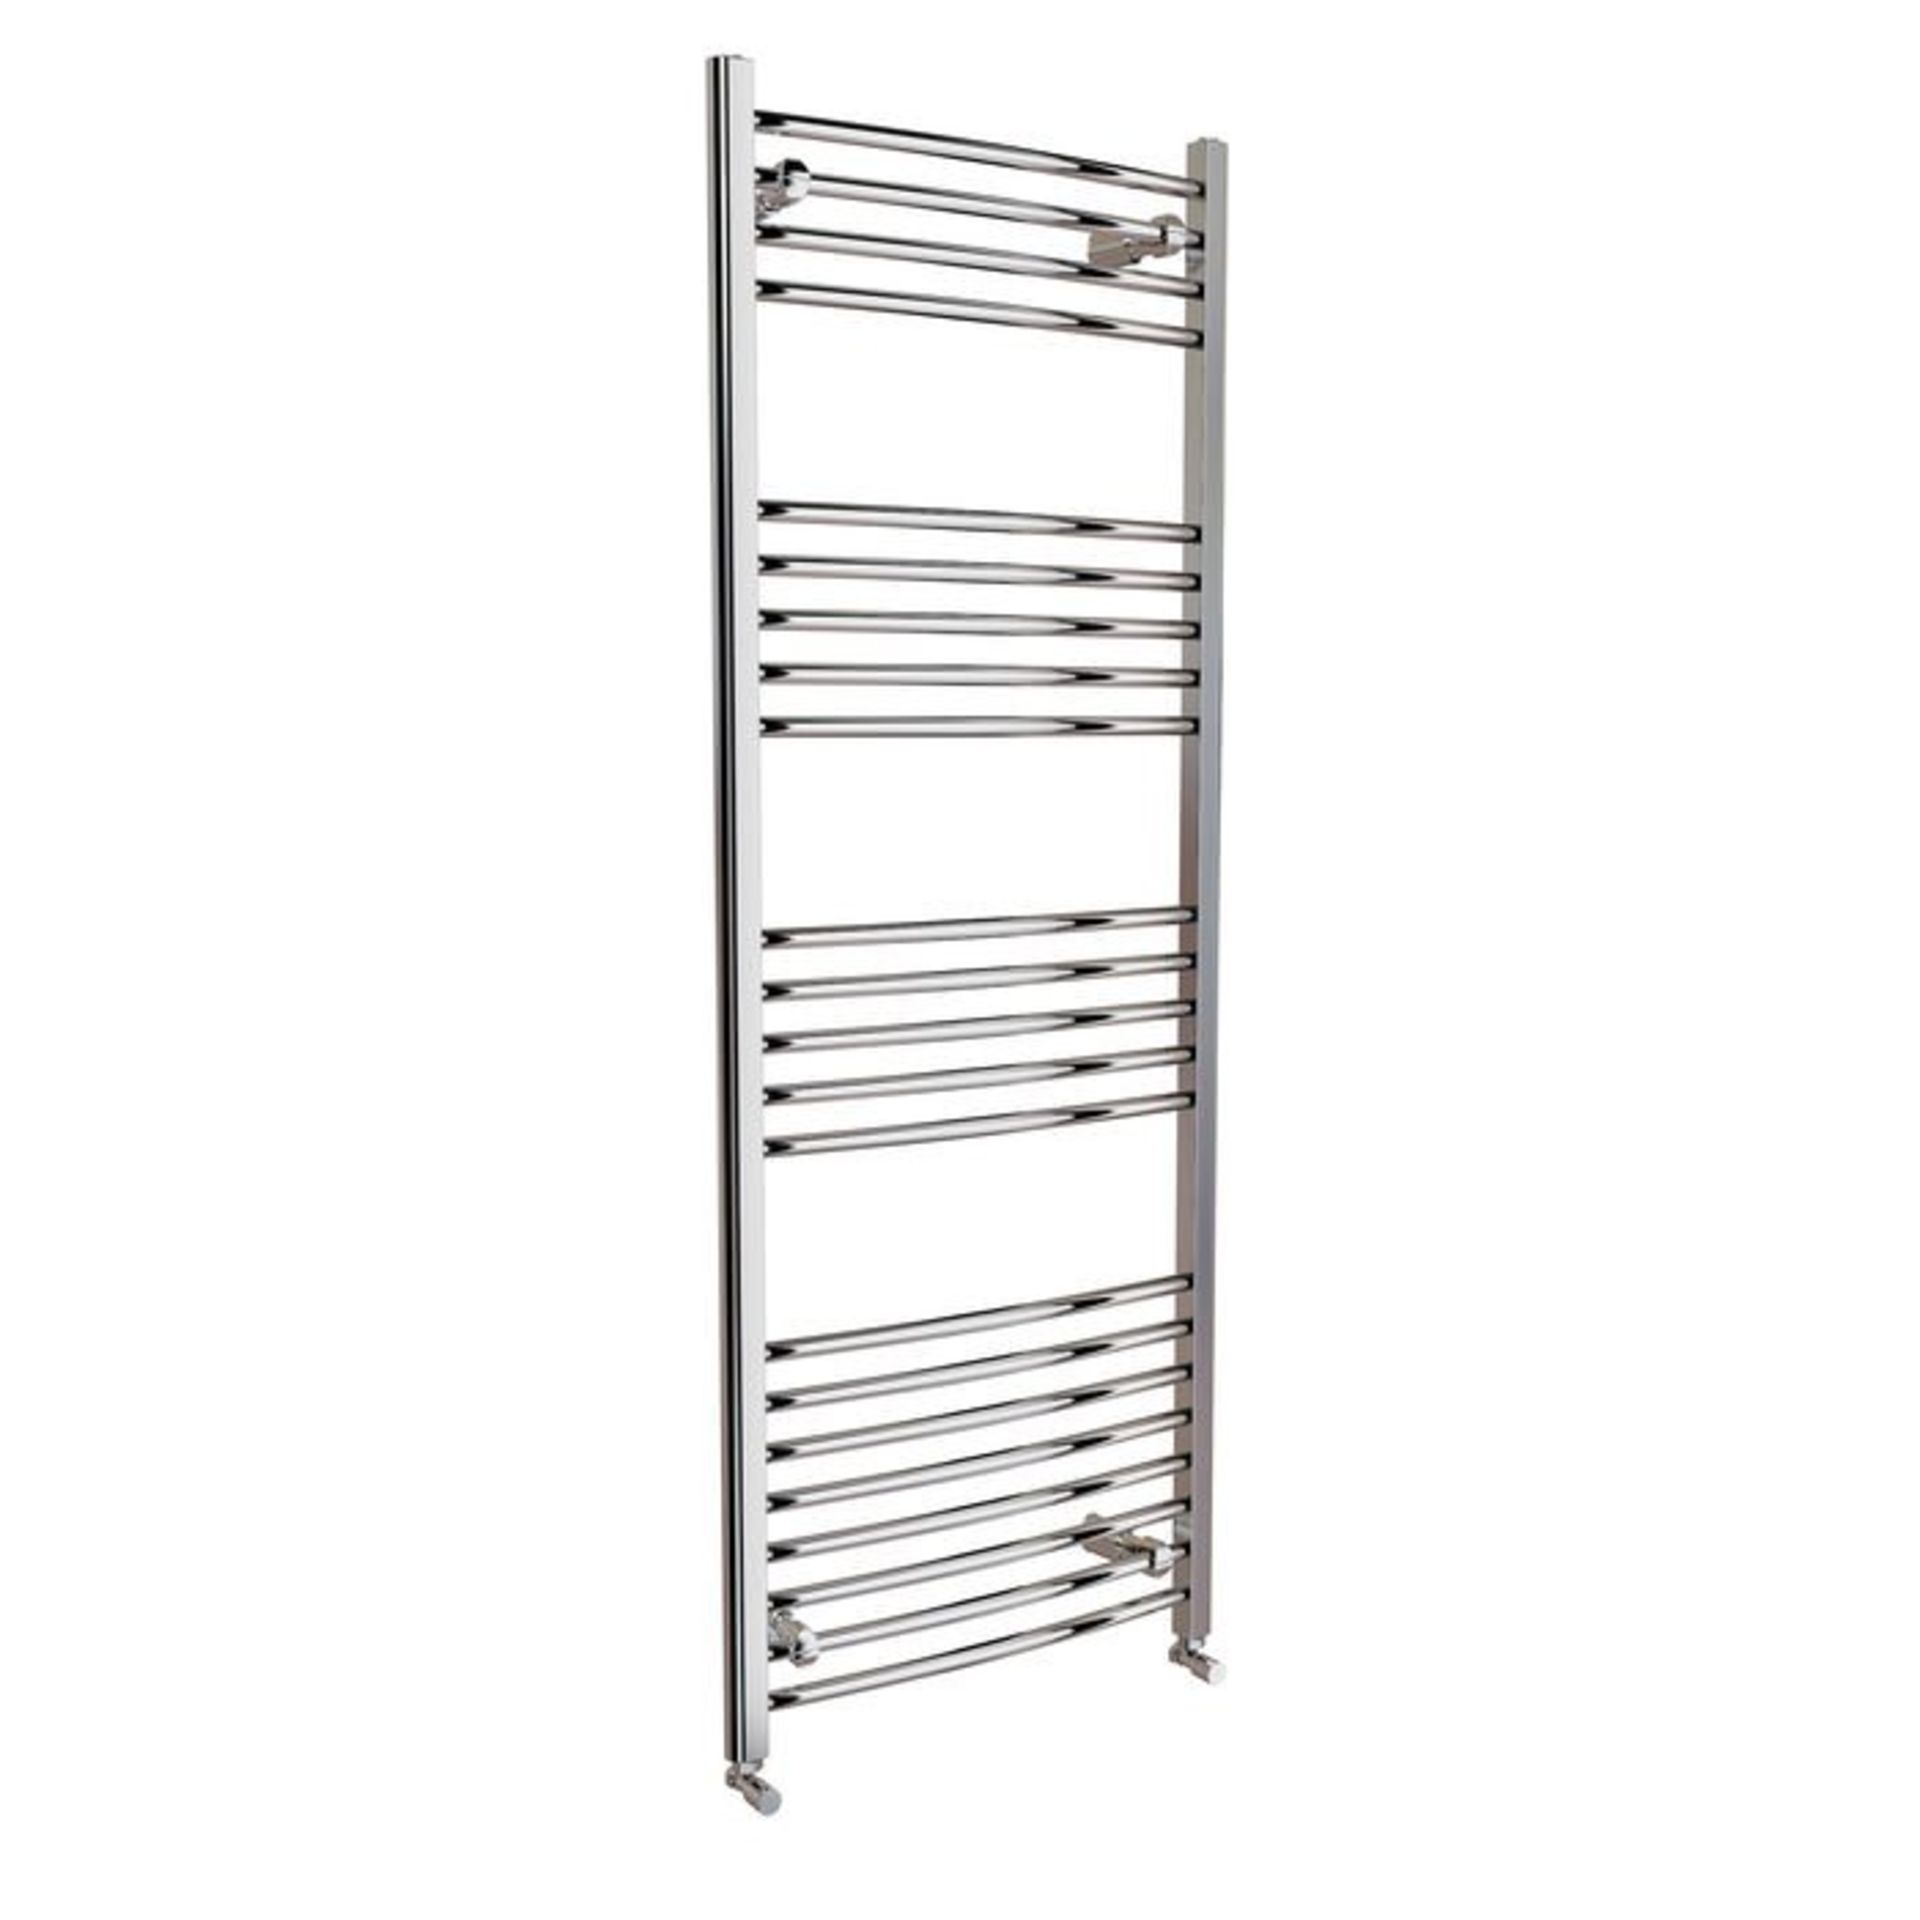 (H151) 1600x600mm - 20mm Tubes - Chrome Curved Rail Ladder Towel Radiator. RRP £150.38. Low carbon - Image 3 of 3